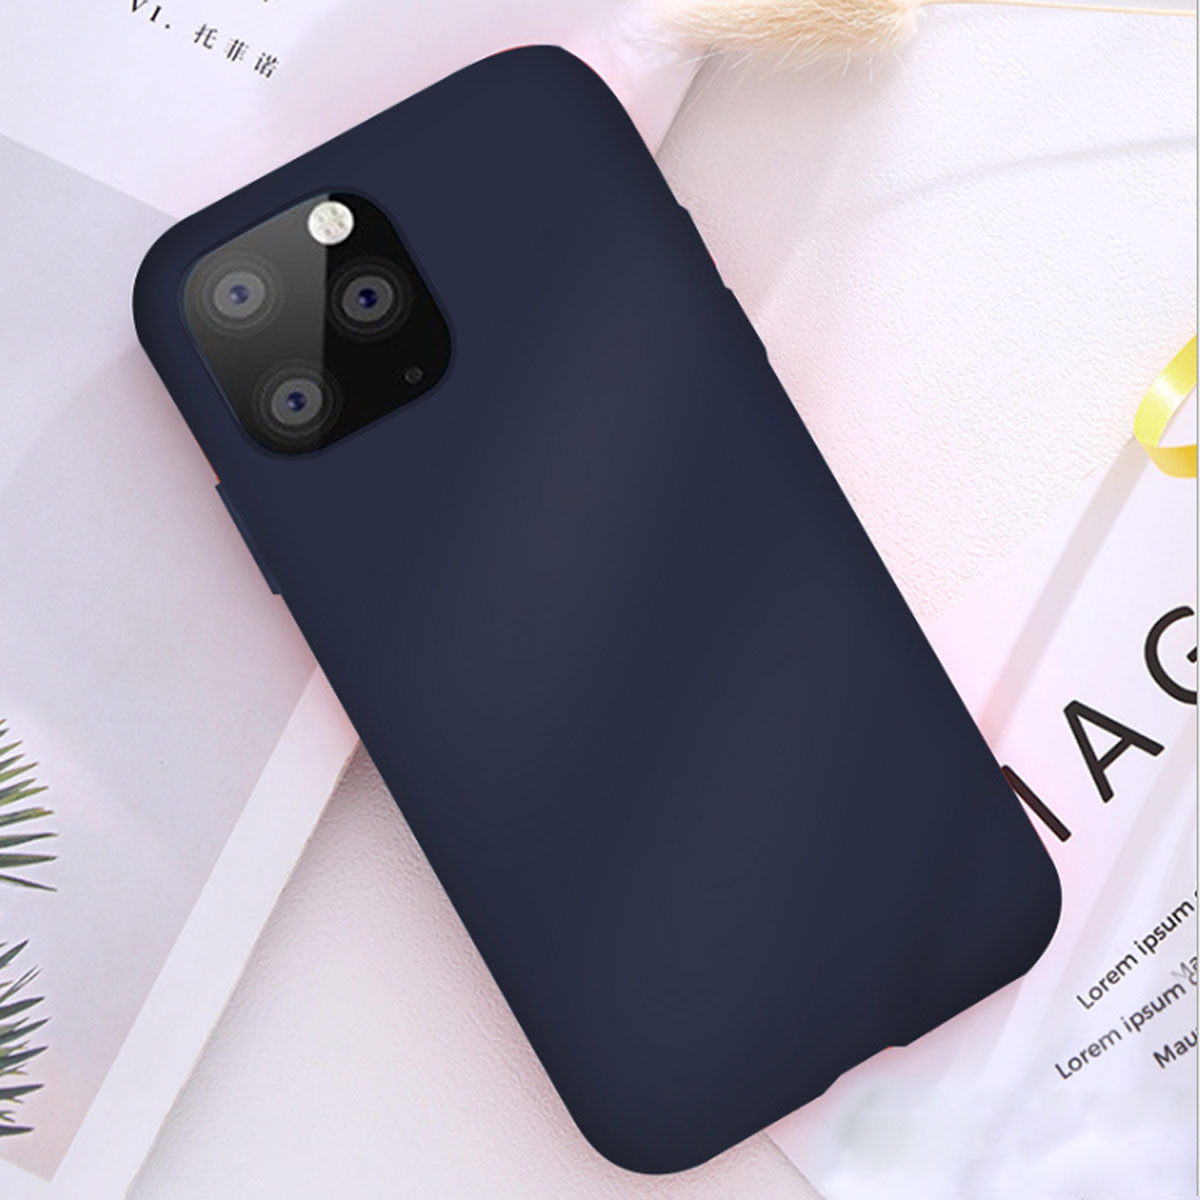 Bakeey Smooth Shockproof Soft Liquid Silicone Rubber Back Cover Protective Case for iPhone 11 Series